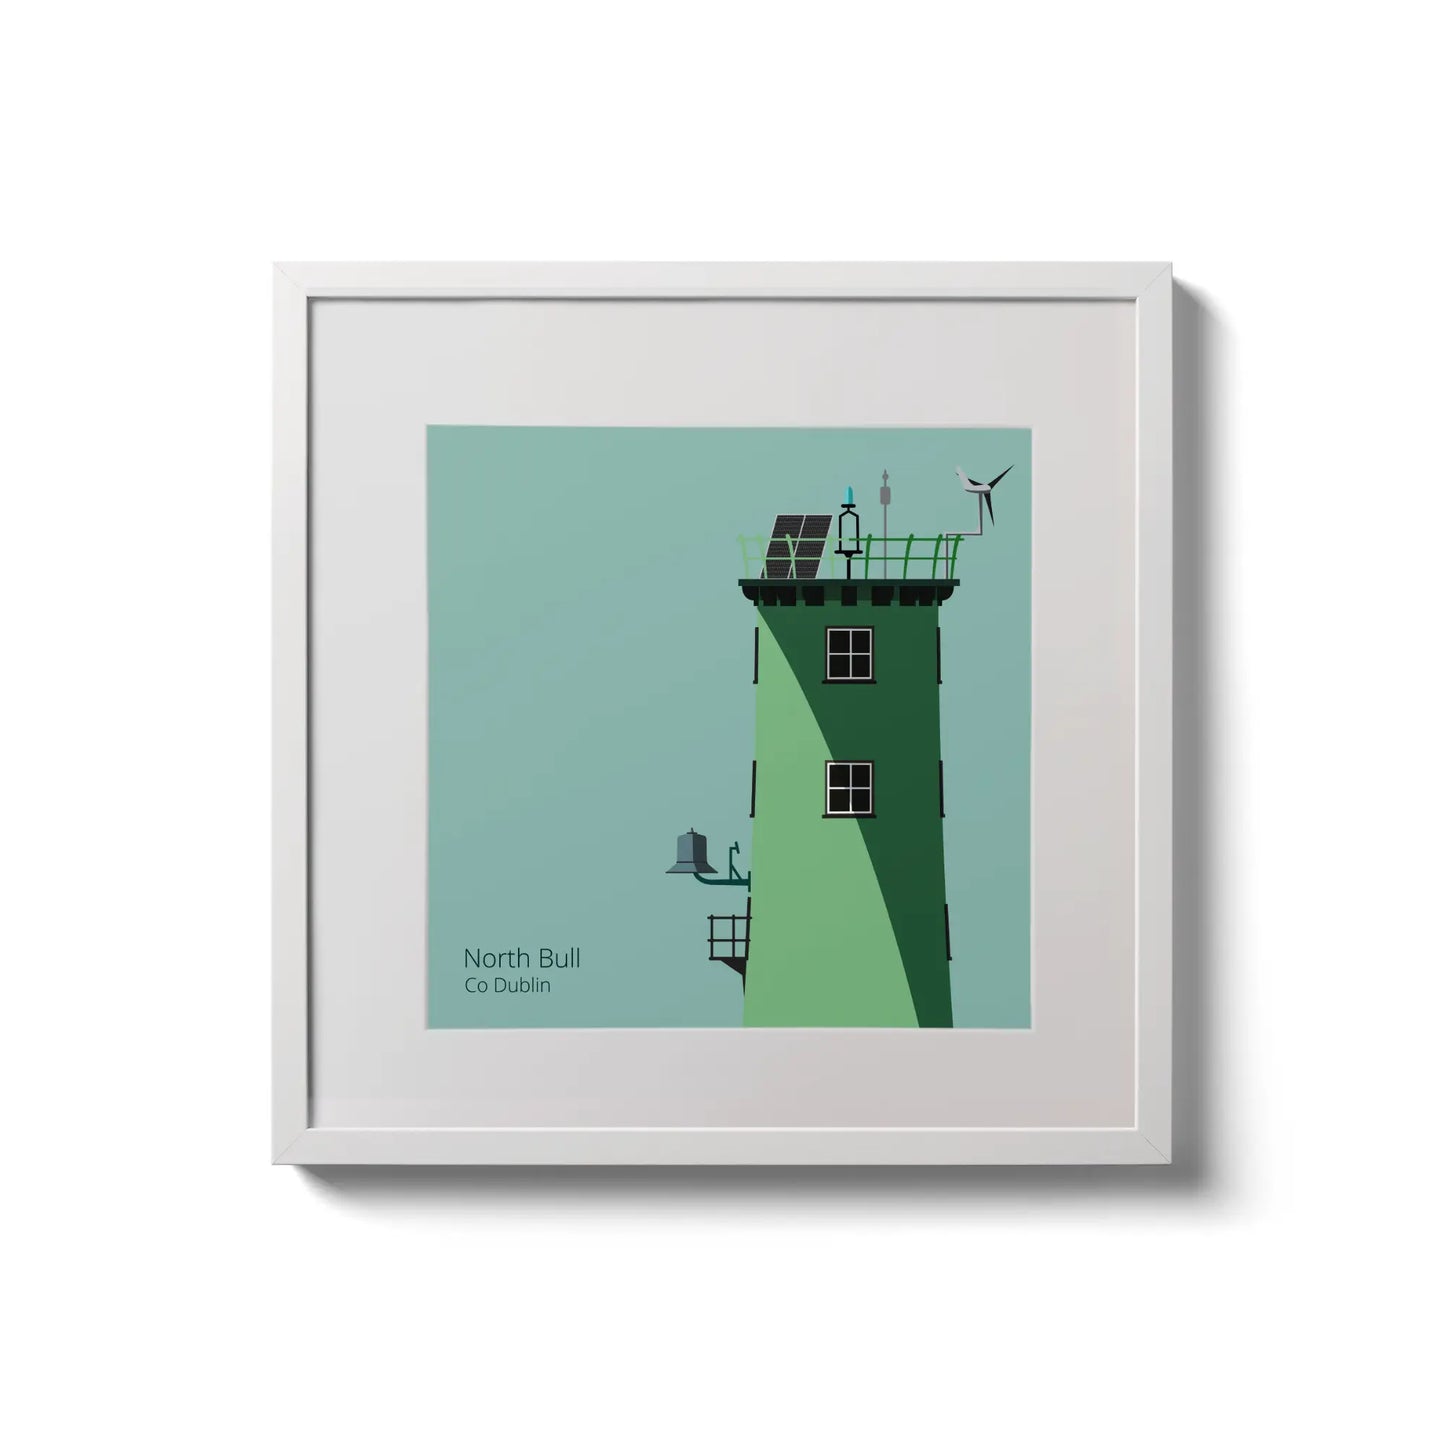 Illustration of North Bull lighthouse on an ocean green background,  in a white square frame measuring 20x20cm.